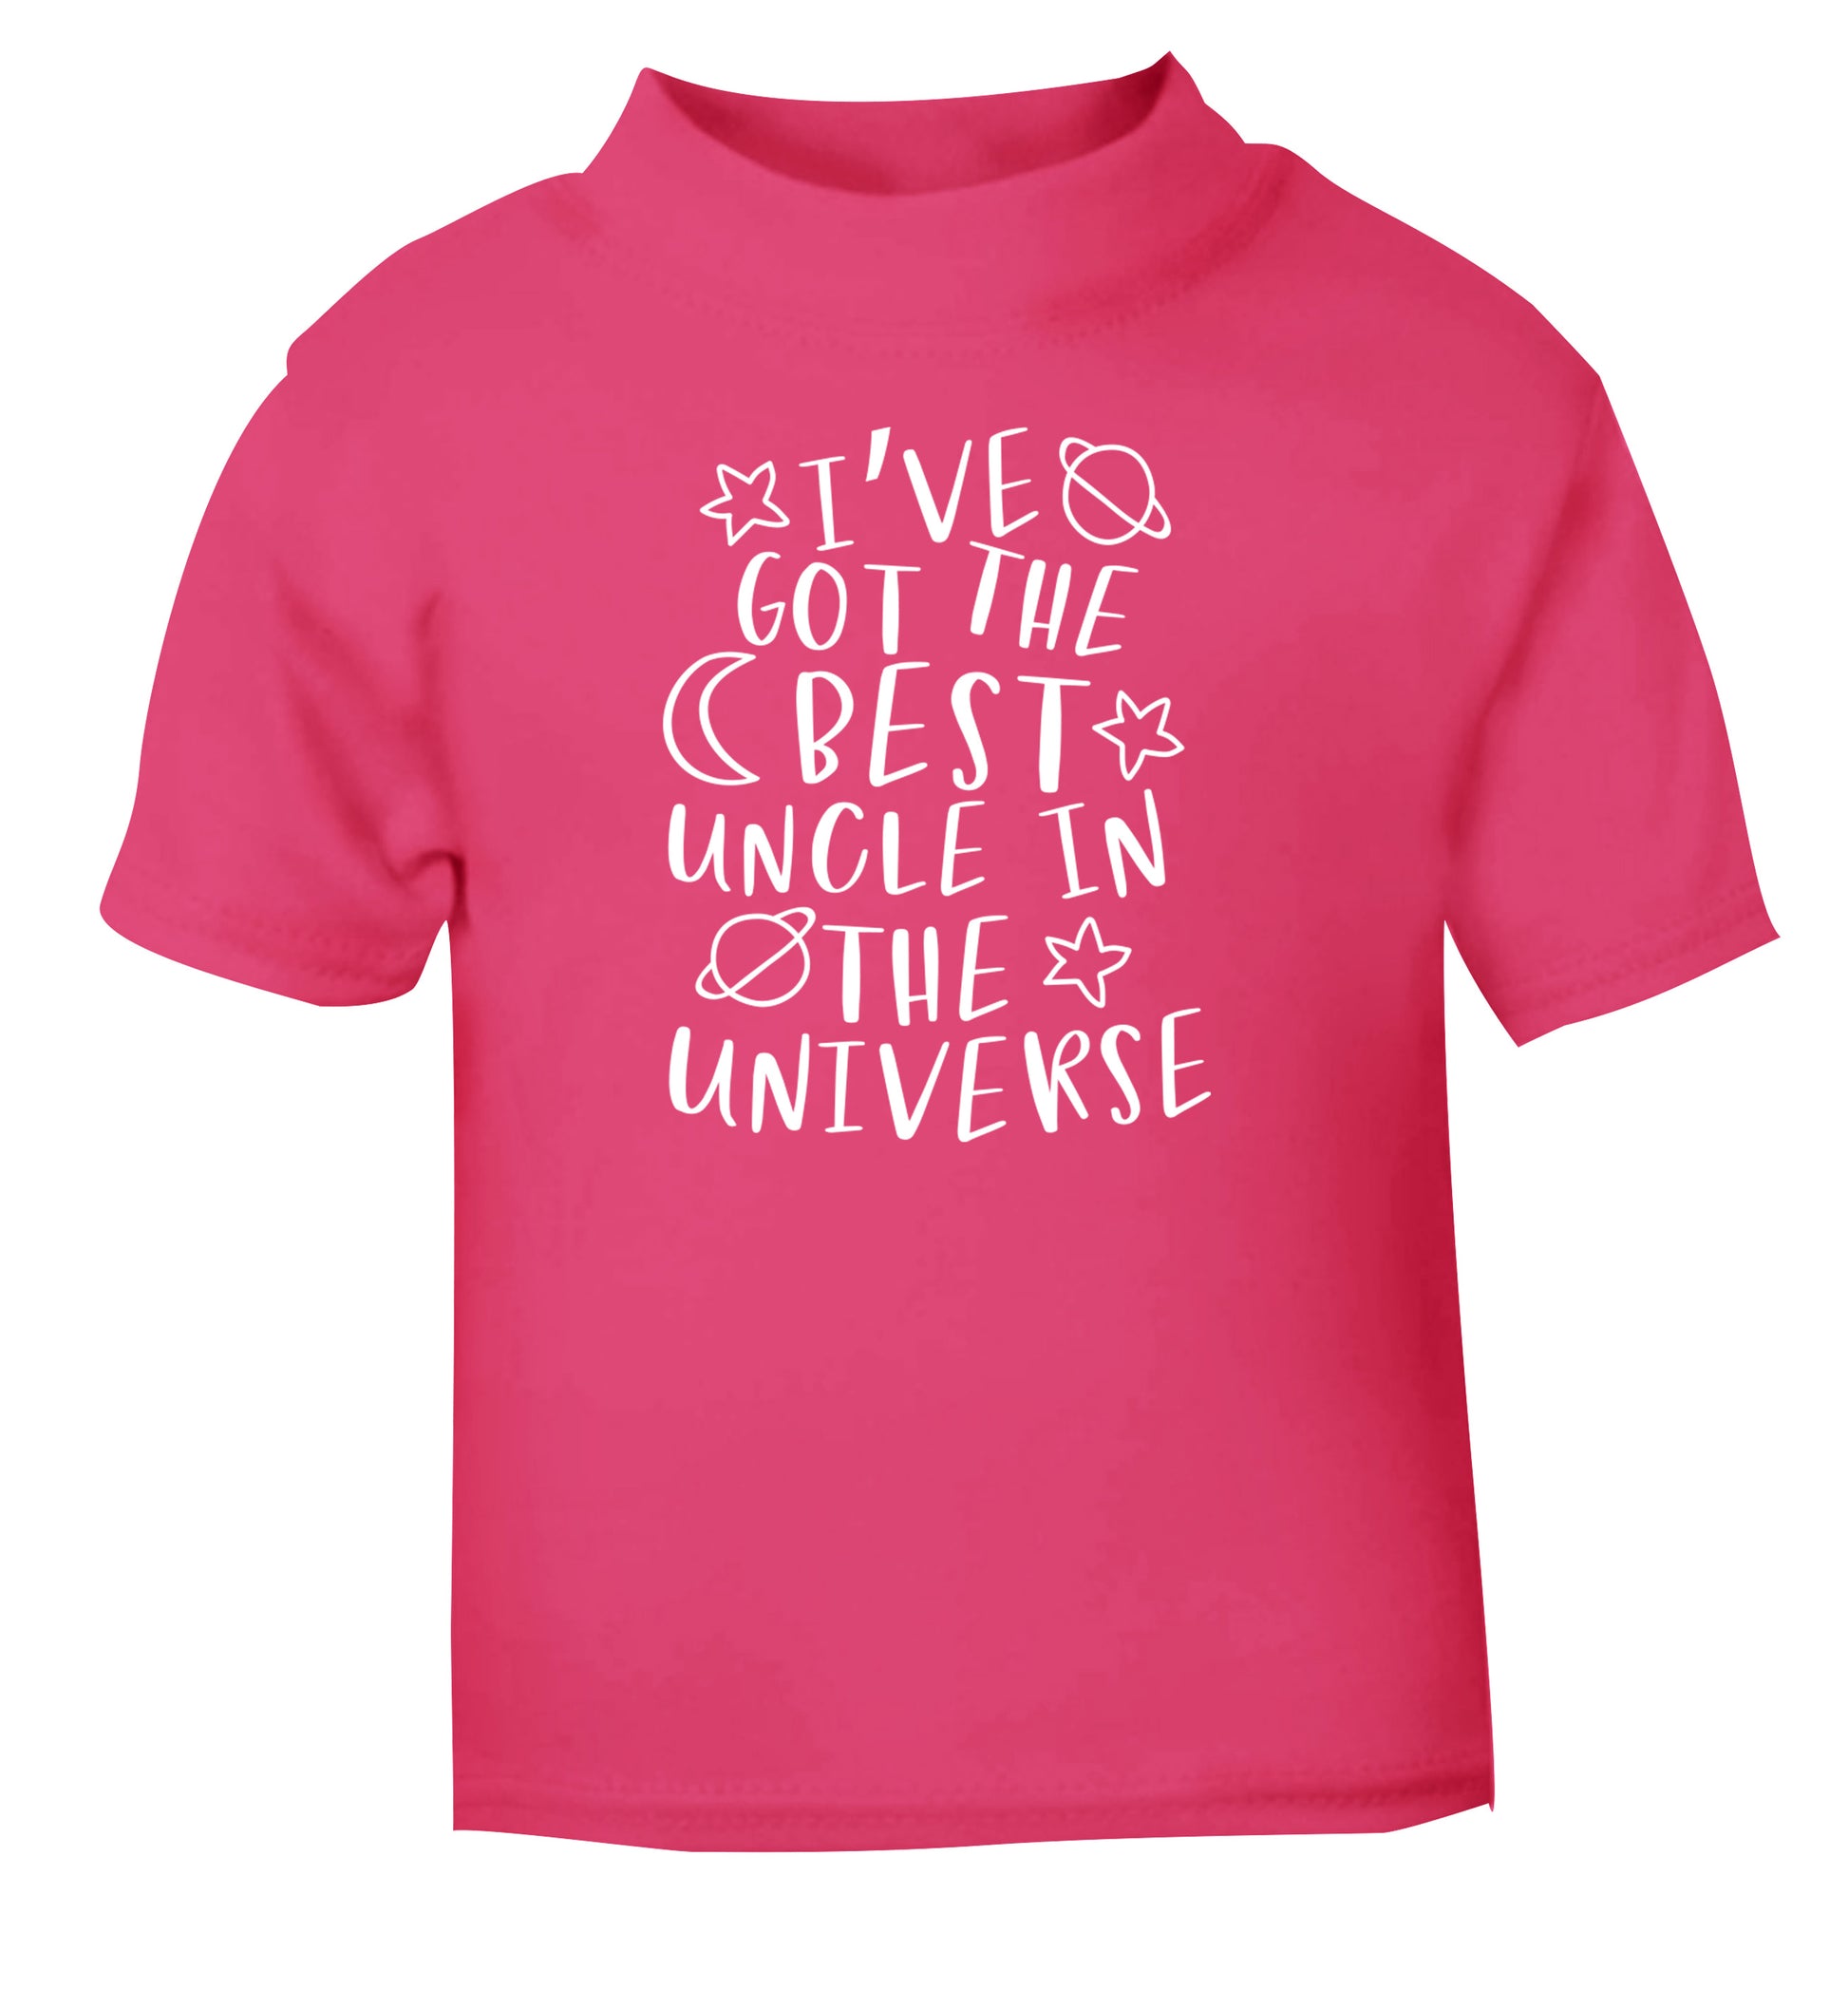 I've got the best uncle in the universe pink Baby Toddler Tshirt 2 Years